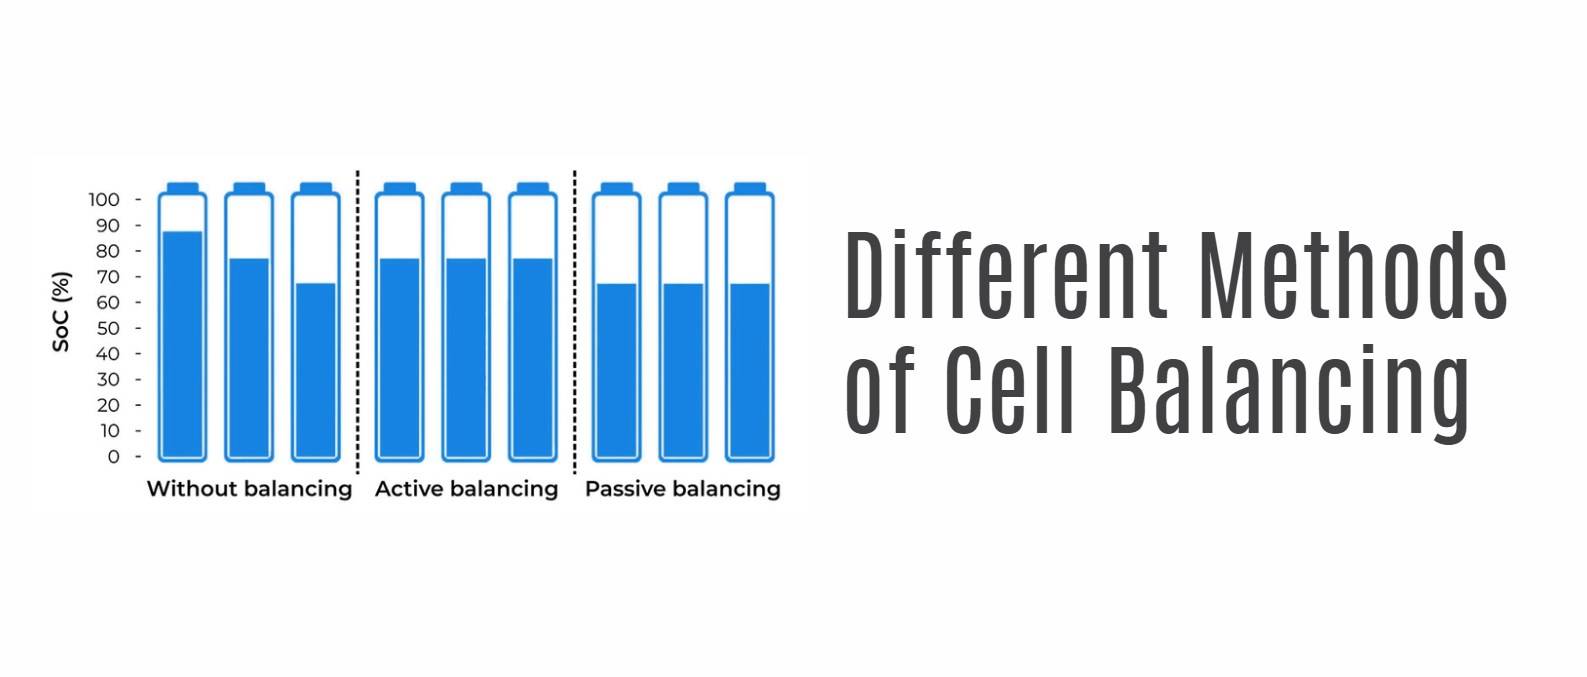 Different Methods of Cell Balancing